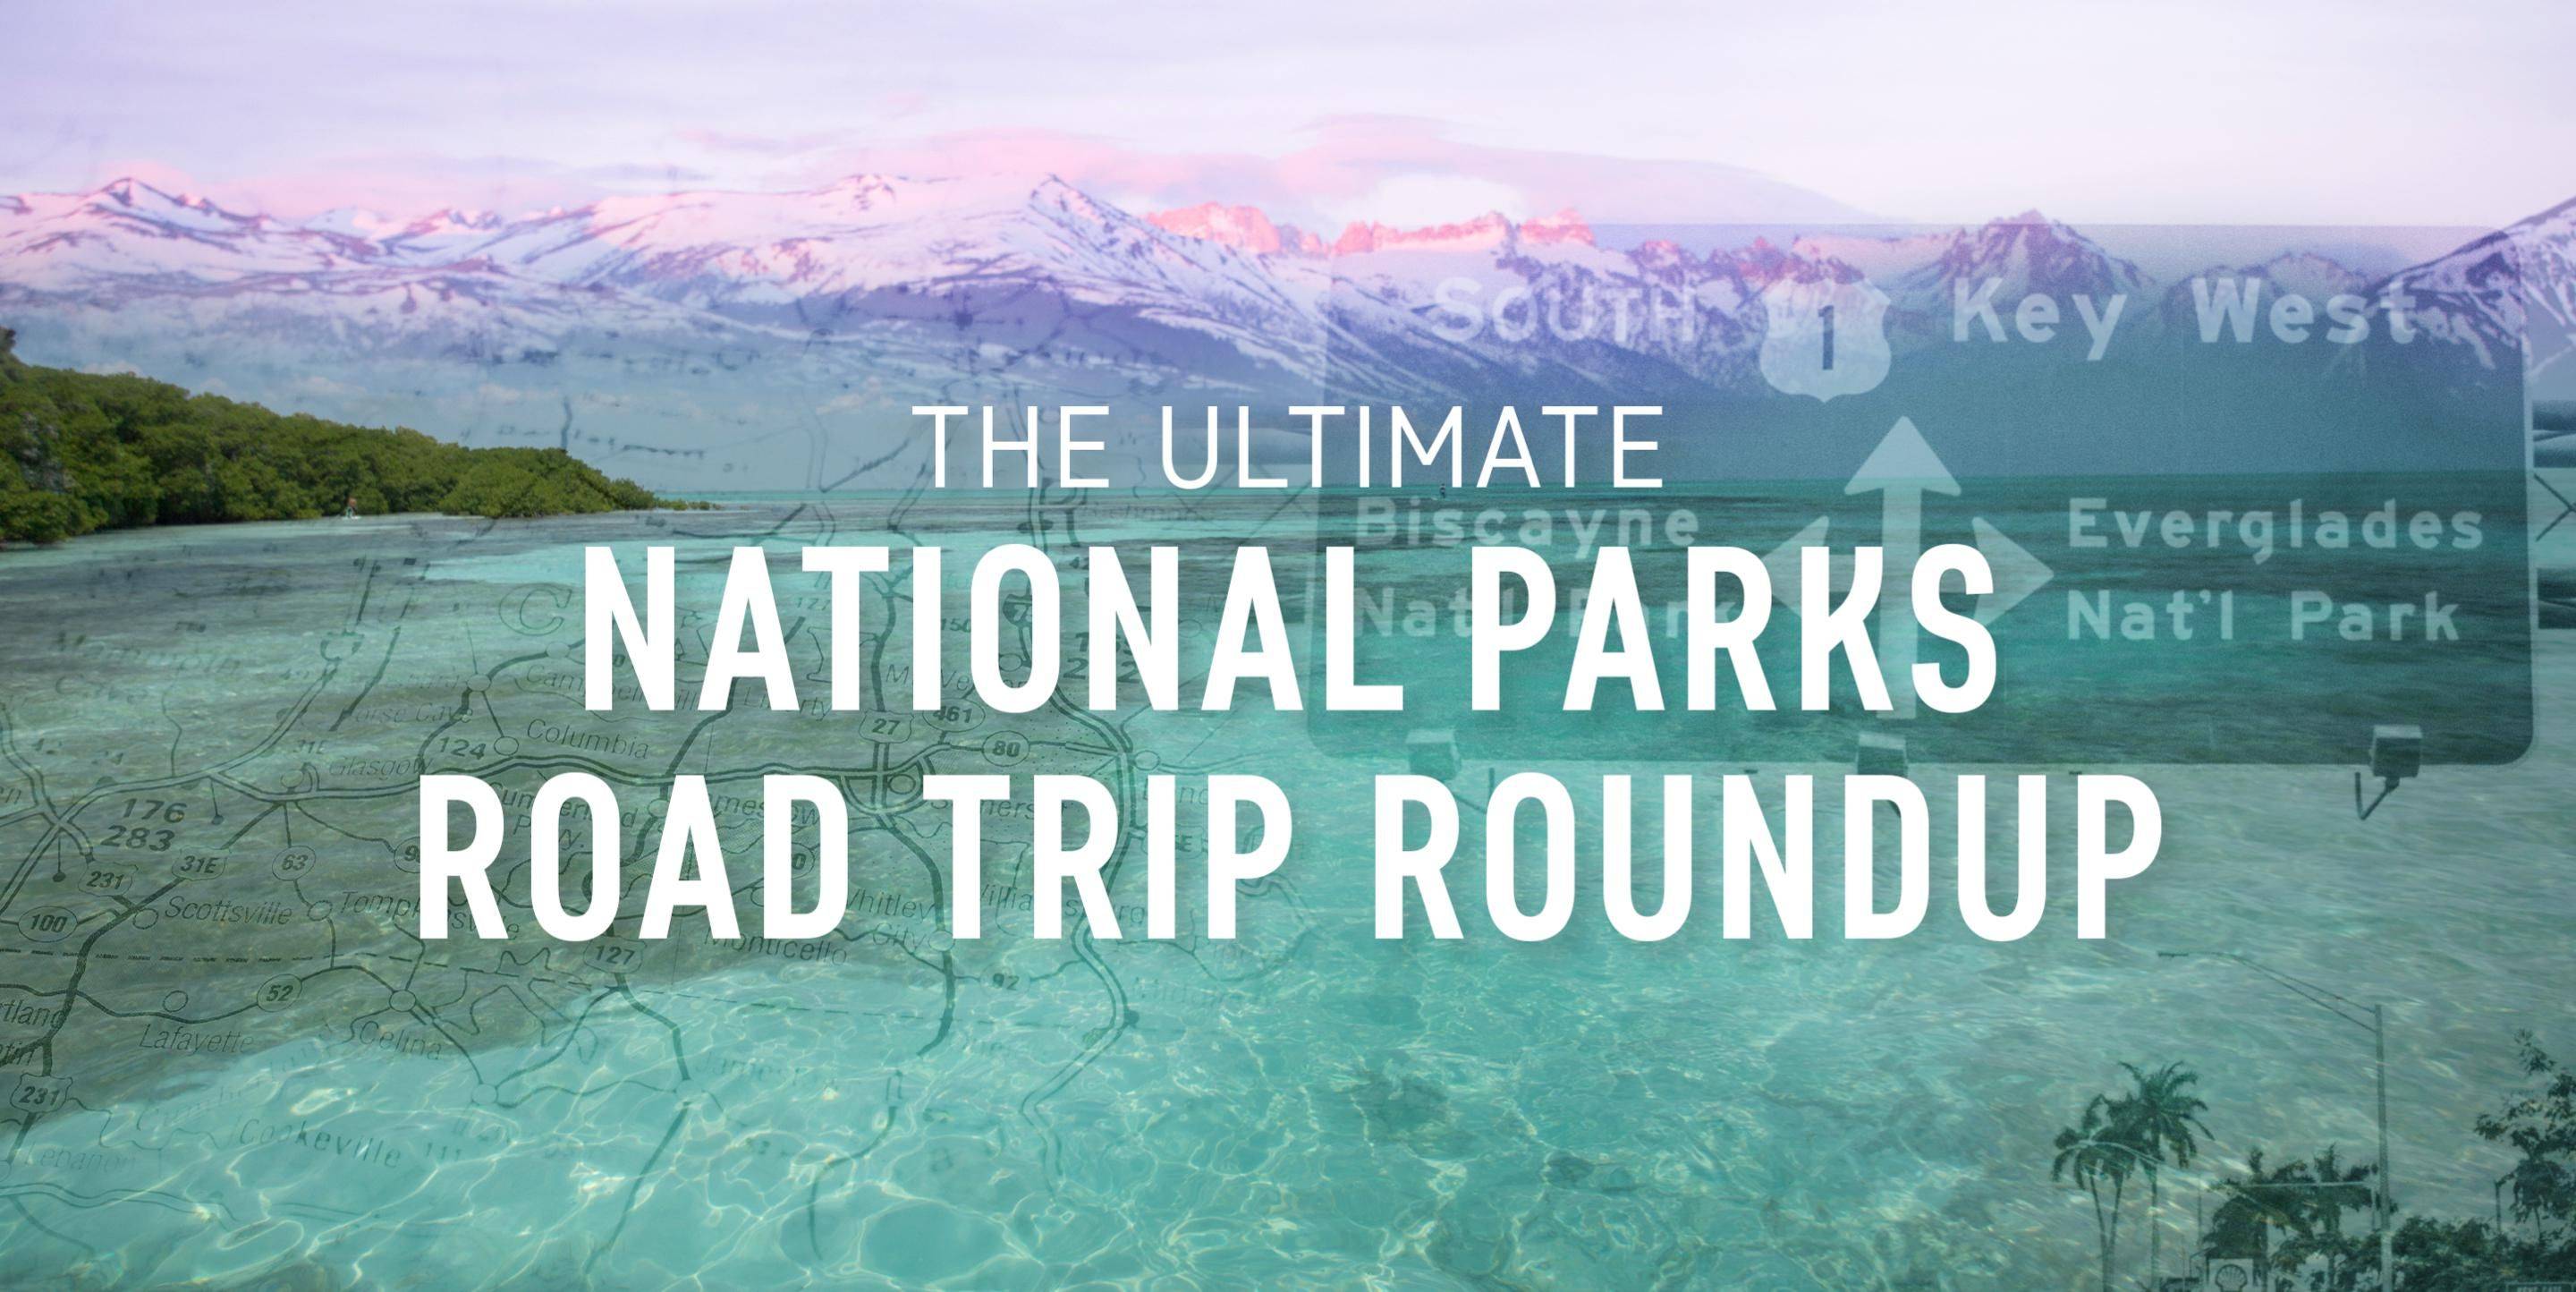 The Ultimate National Parks Road Trip Roundup